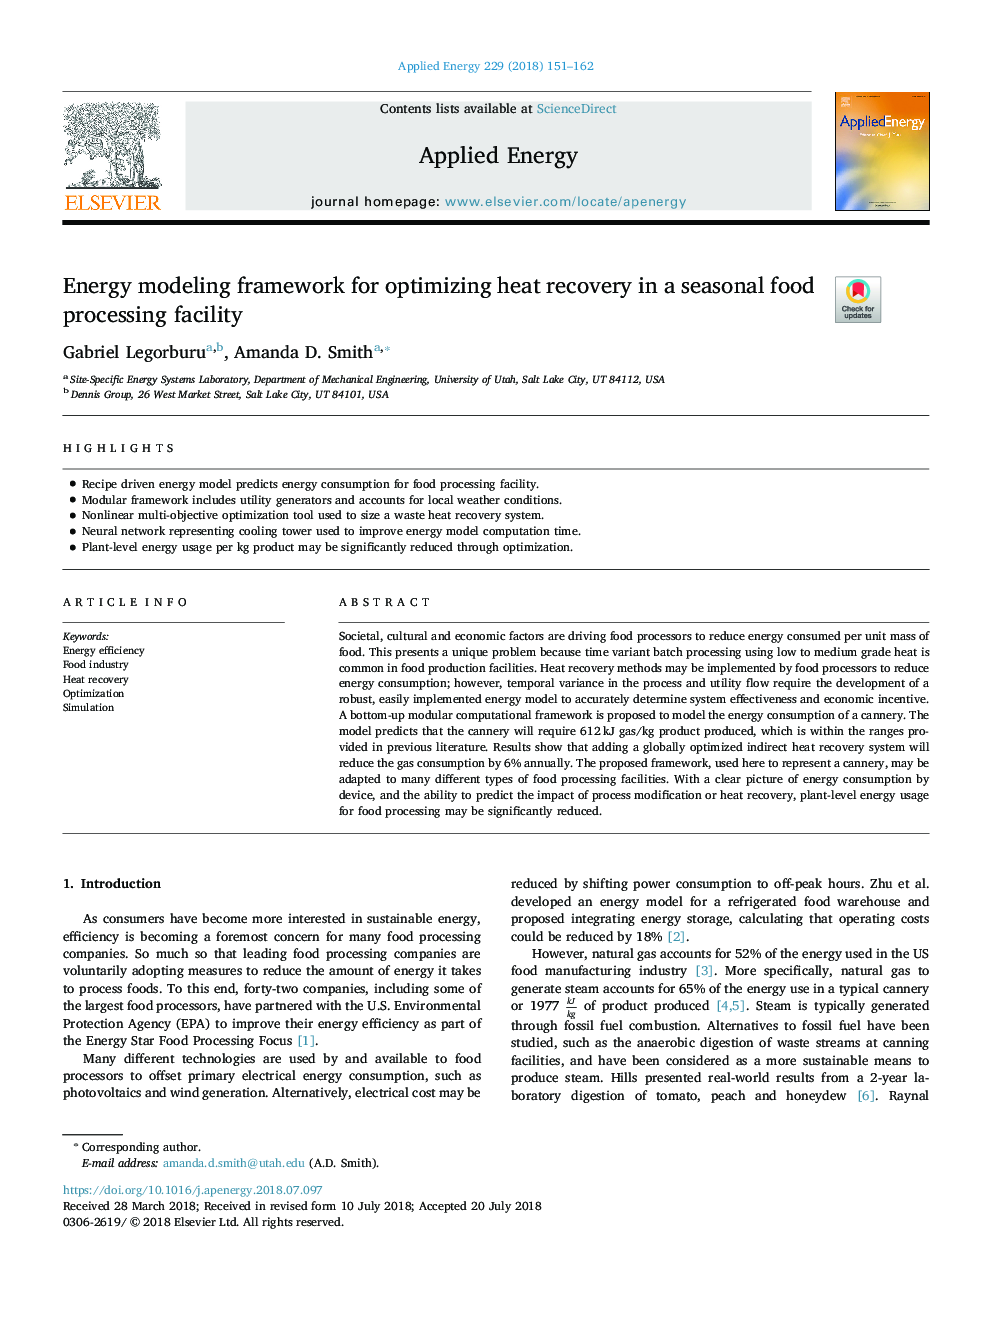 Energy modeling framework for optimizing heat recovery in a seasonal food processing facility